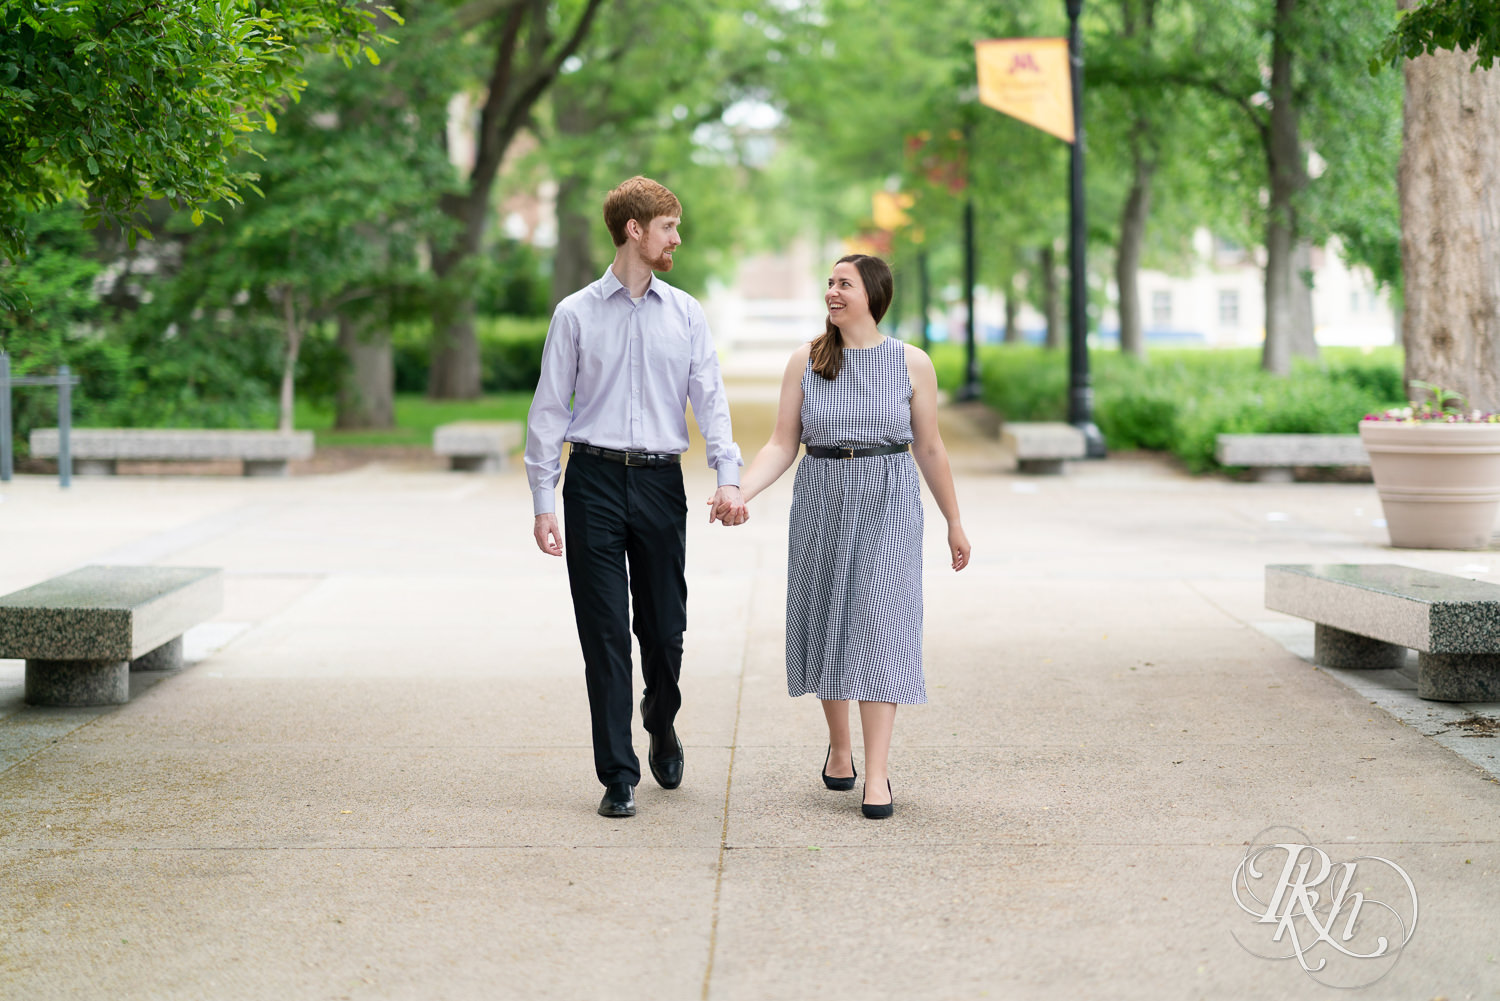 Man and woman walking and lauging during engagement session at University of Minnesota.